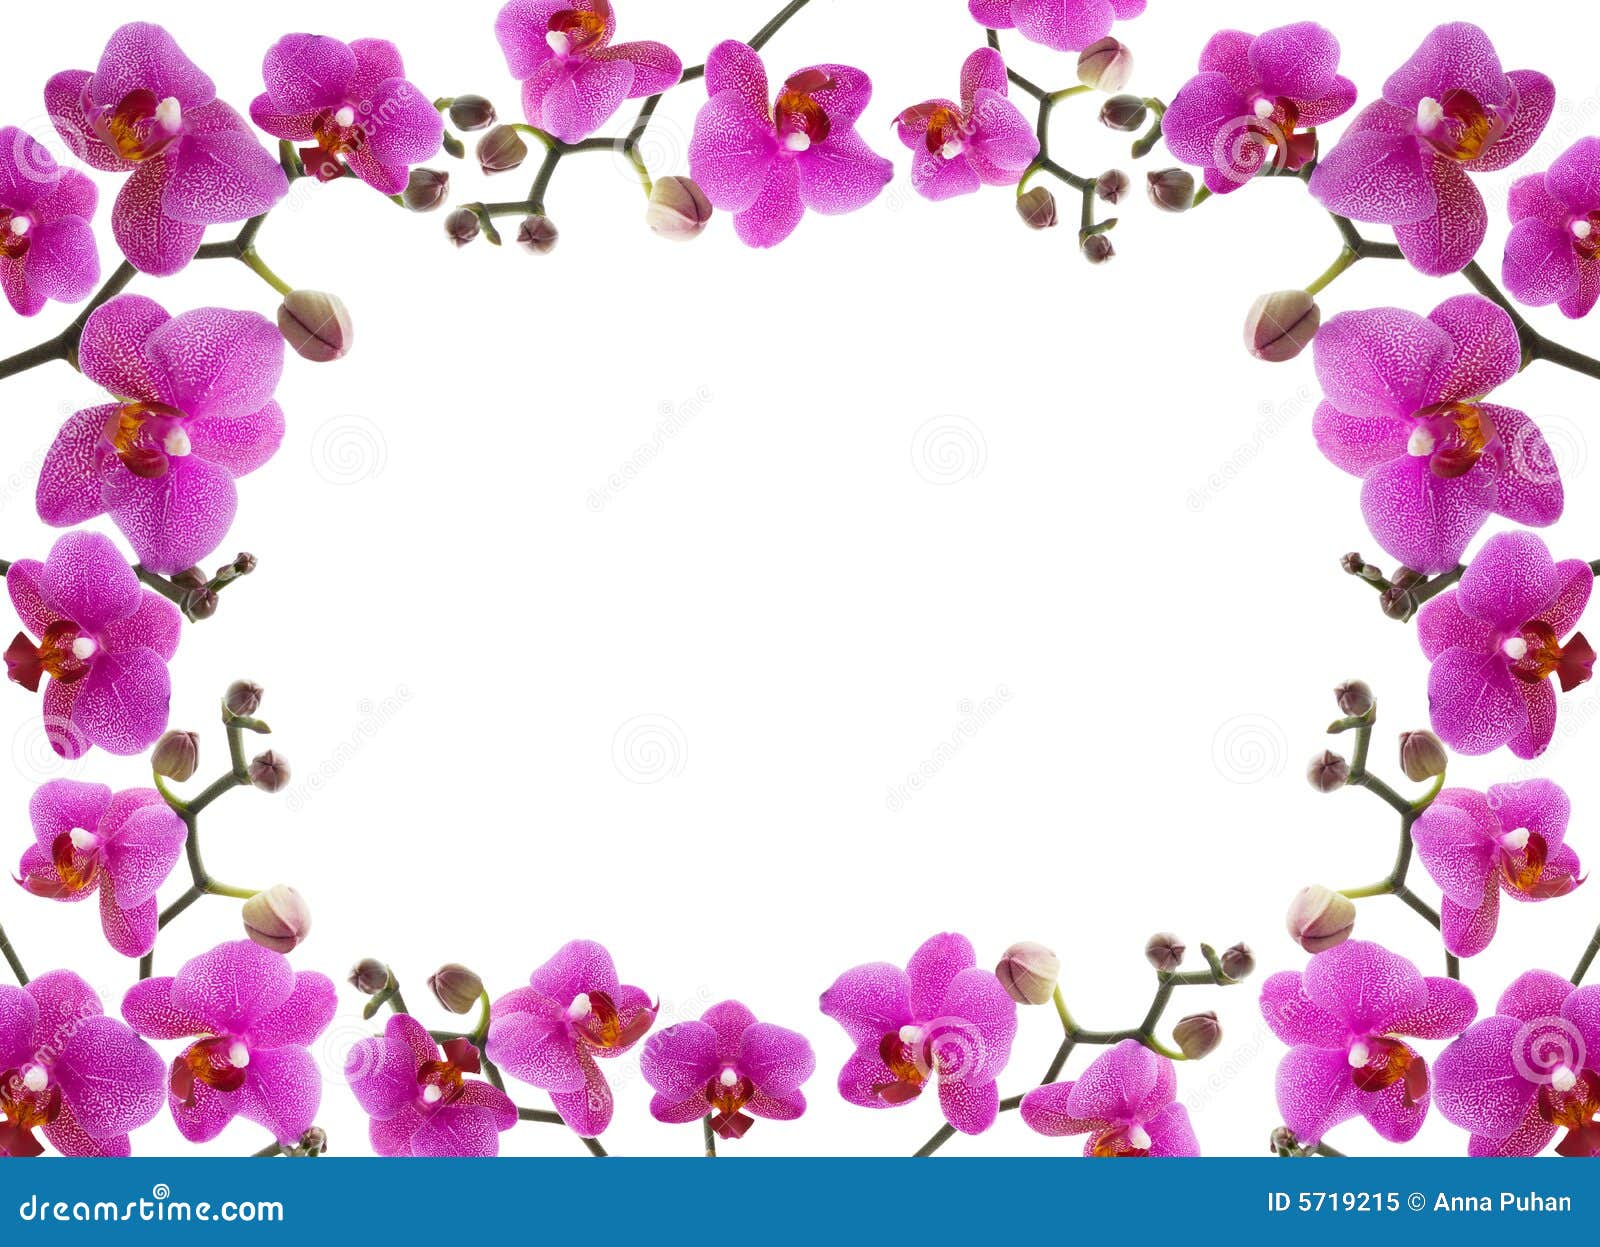 image editor clipart frames download - photo #44